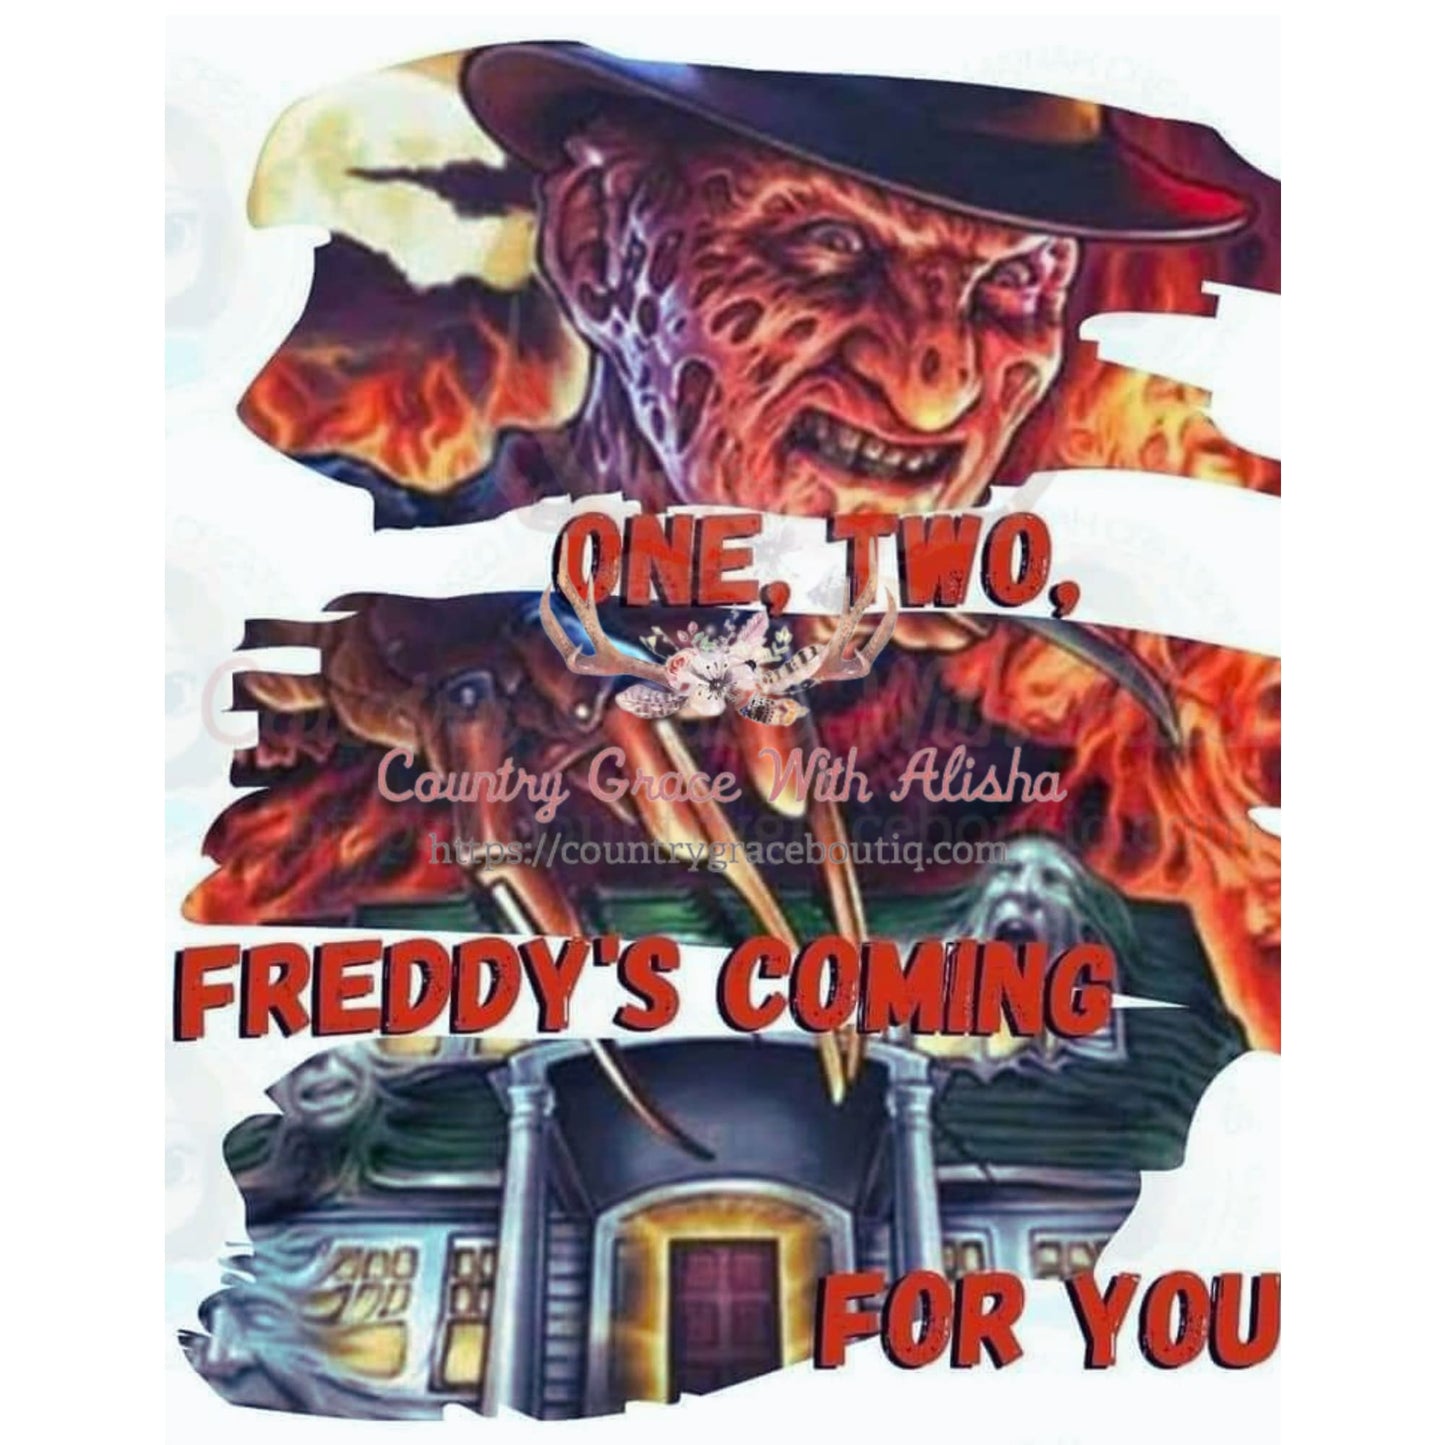 Freddy’s Comin For You Sublimation Transfer - Sub $1.50 